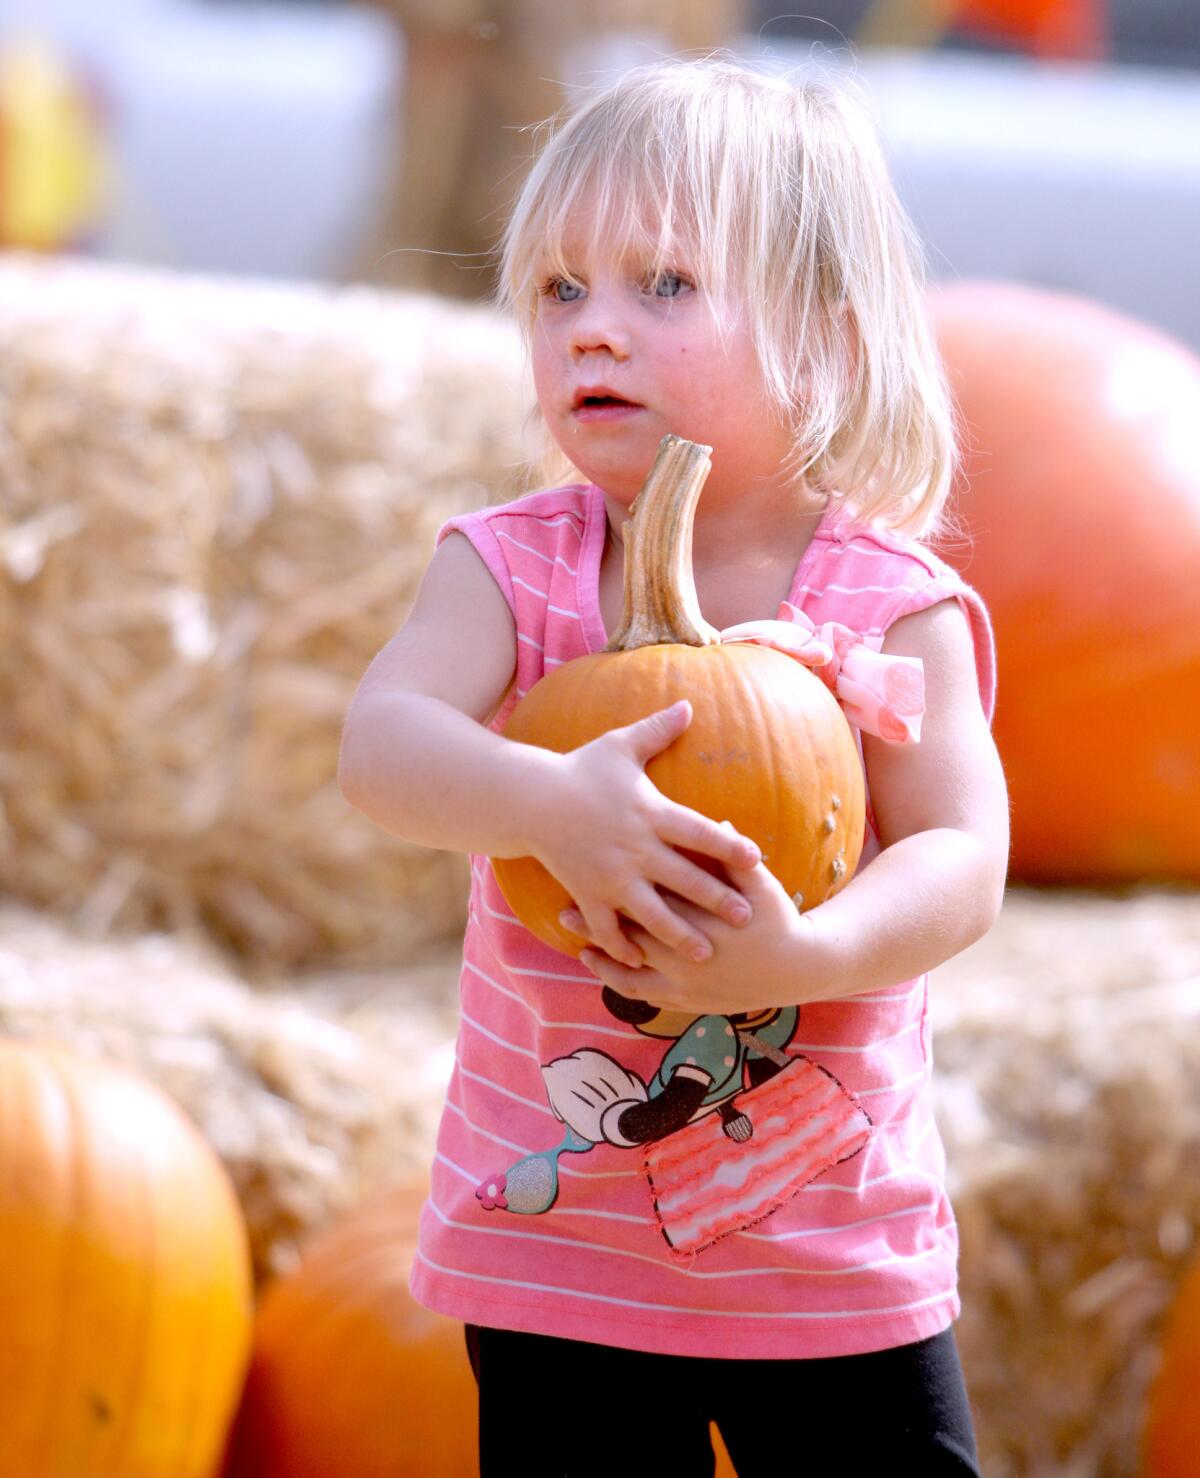 Two-year old Abby Rygh of Sunland holds on tight to the pumpkin she chose at the La Crescenta Pumpkin Patch at Briggs and Foothill, in La Crescenta on Tuesday, October 27, 2015. The pumpkin patch is open seven days a week, 9-9 until November 1. It will reopen as a Christmas tree lot at the end of November.